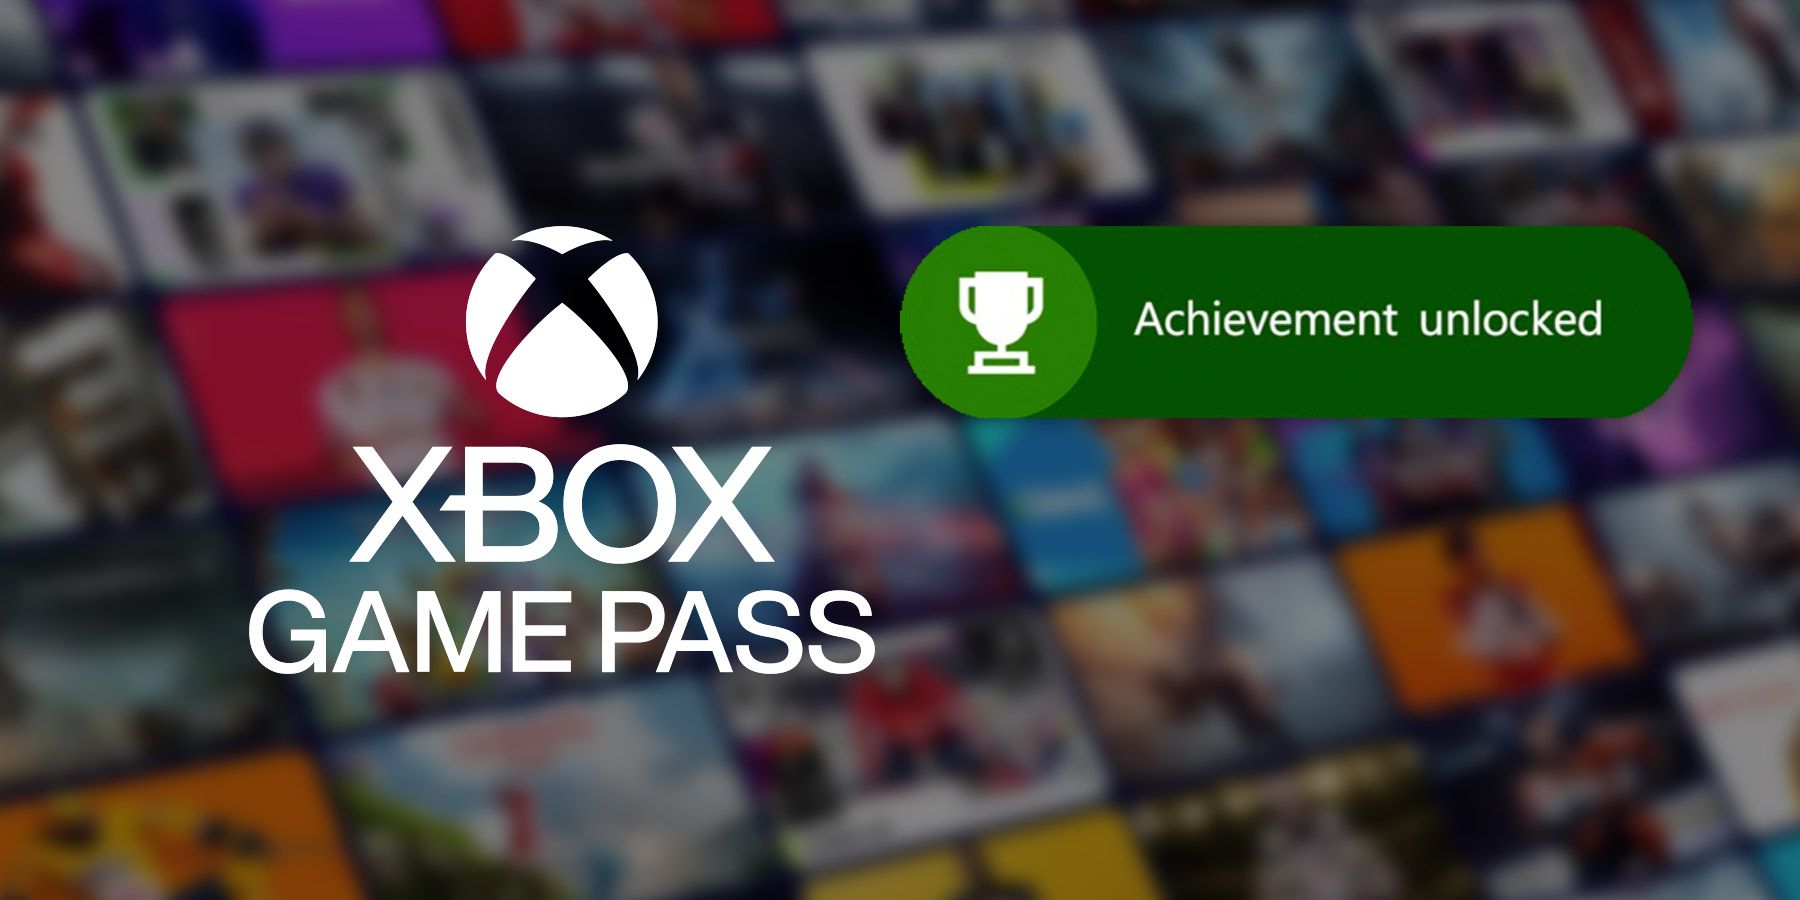 Paid Service - Xbox One Achievements and Gamerscore